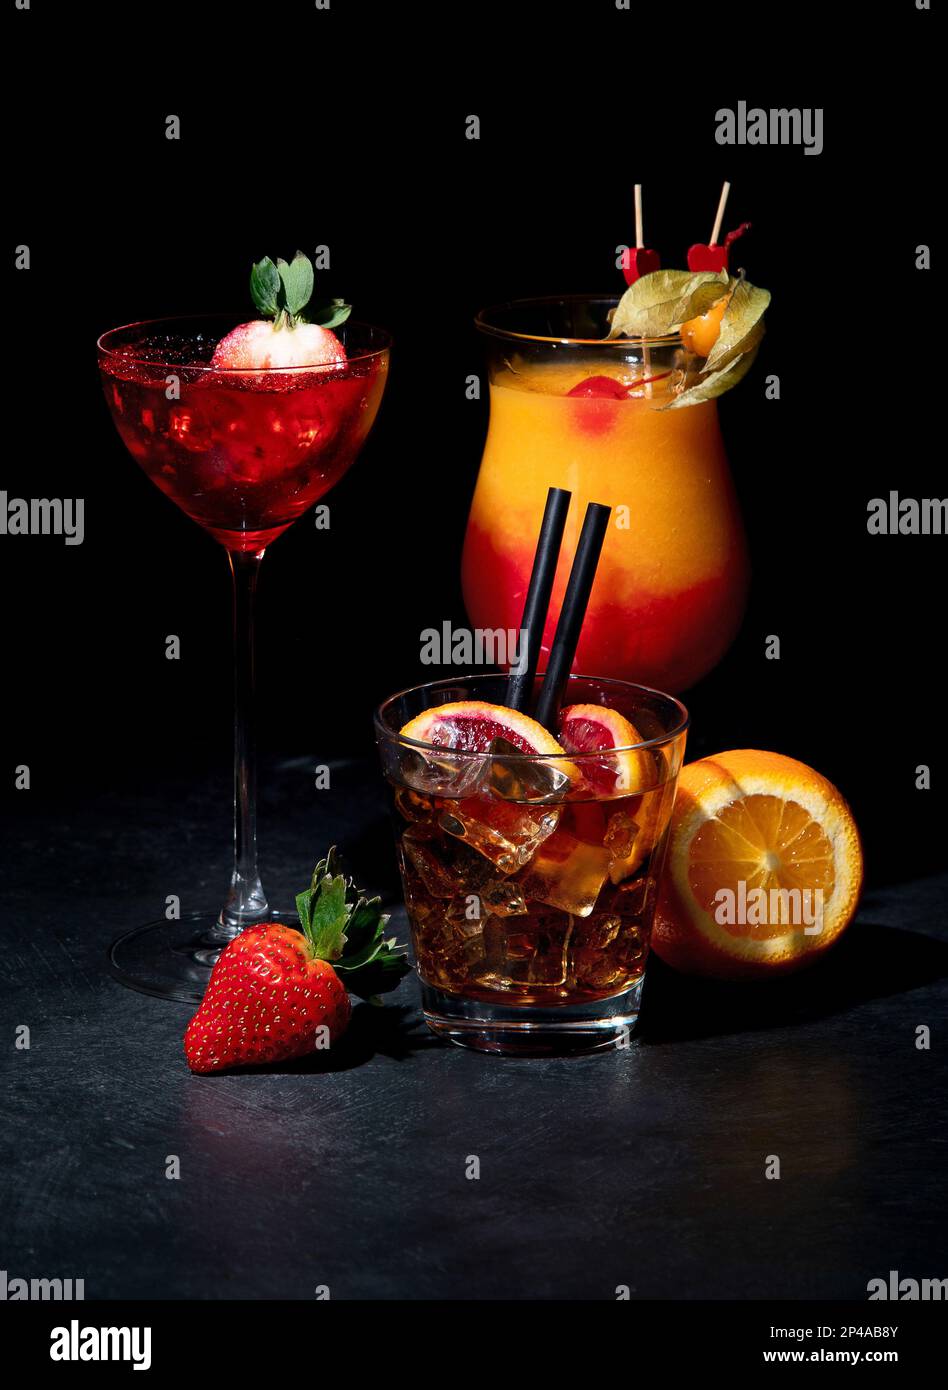 Set of various colorful cocktails on black background. Classic long drink cocktails menu concept. Stock Photo